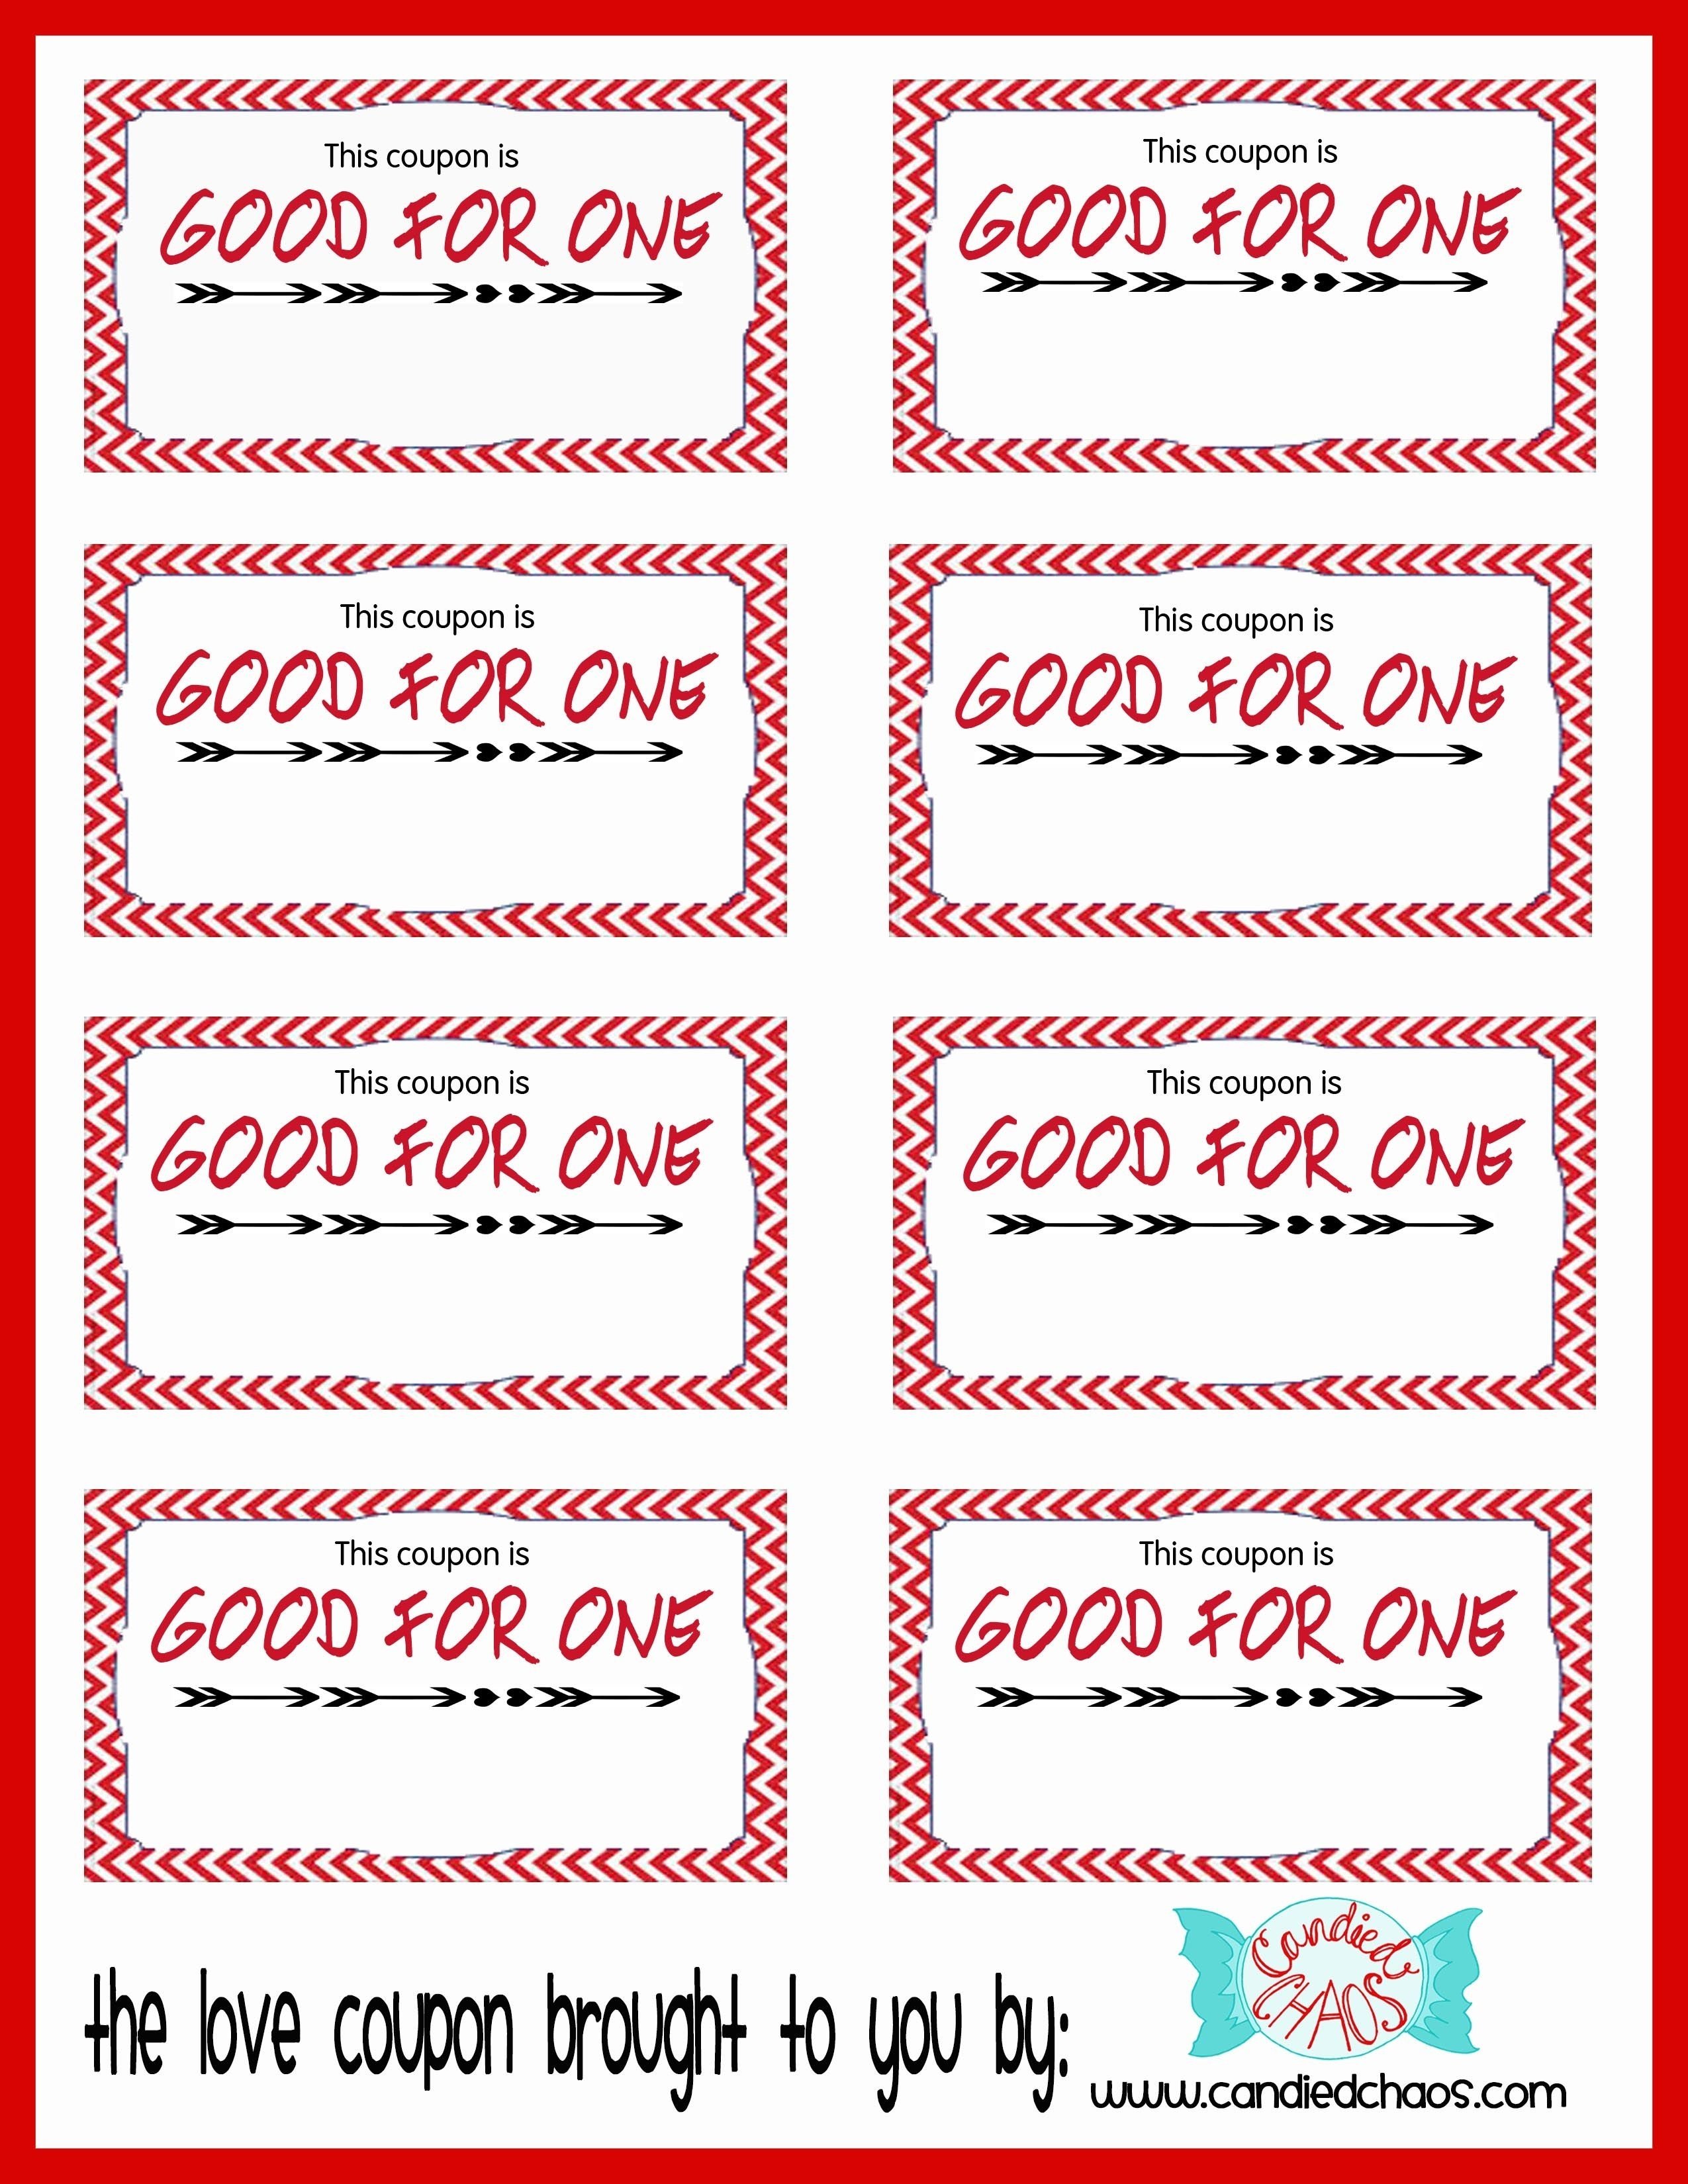 10 Unique Coupon Book Ideas For Husband naughty coupon book printable 2022